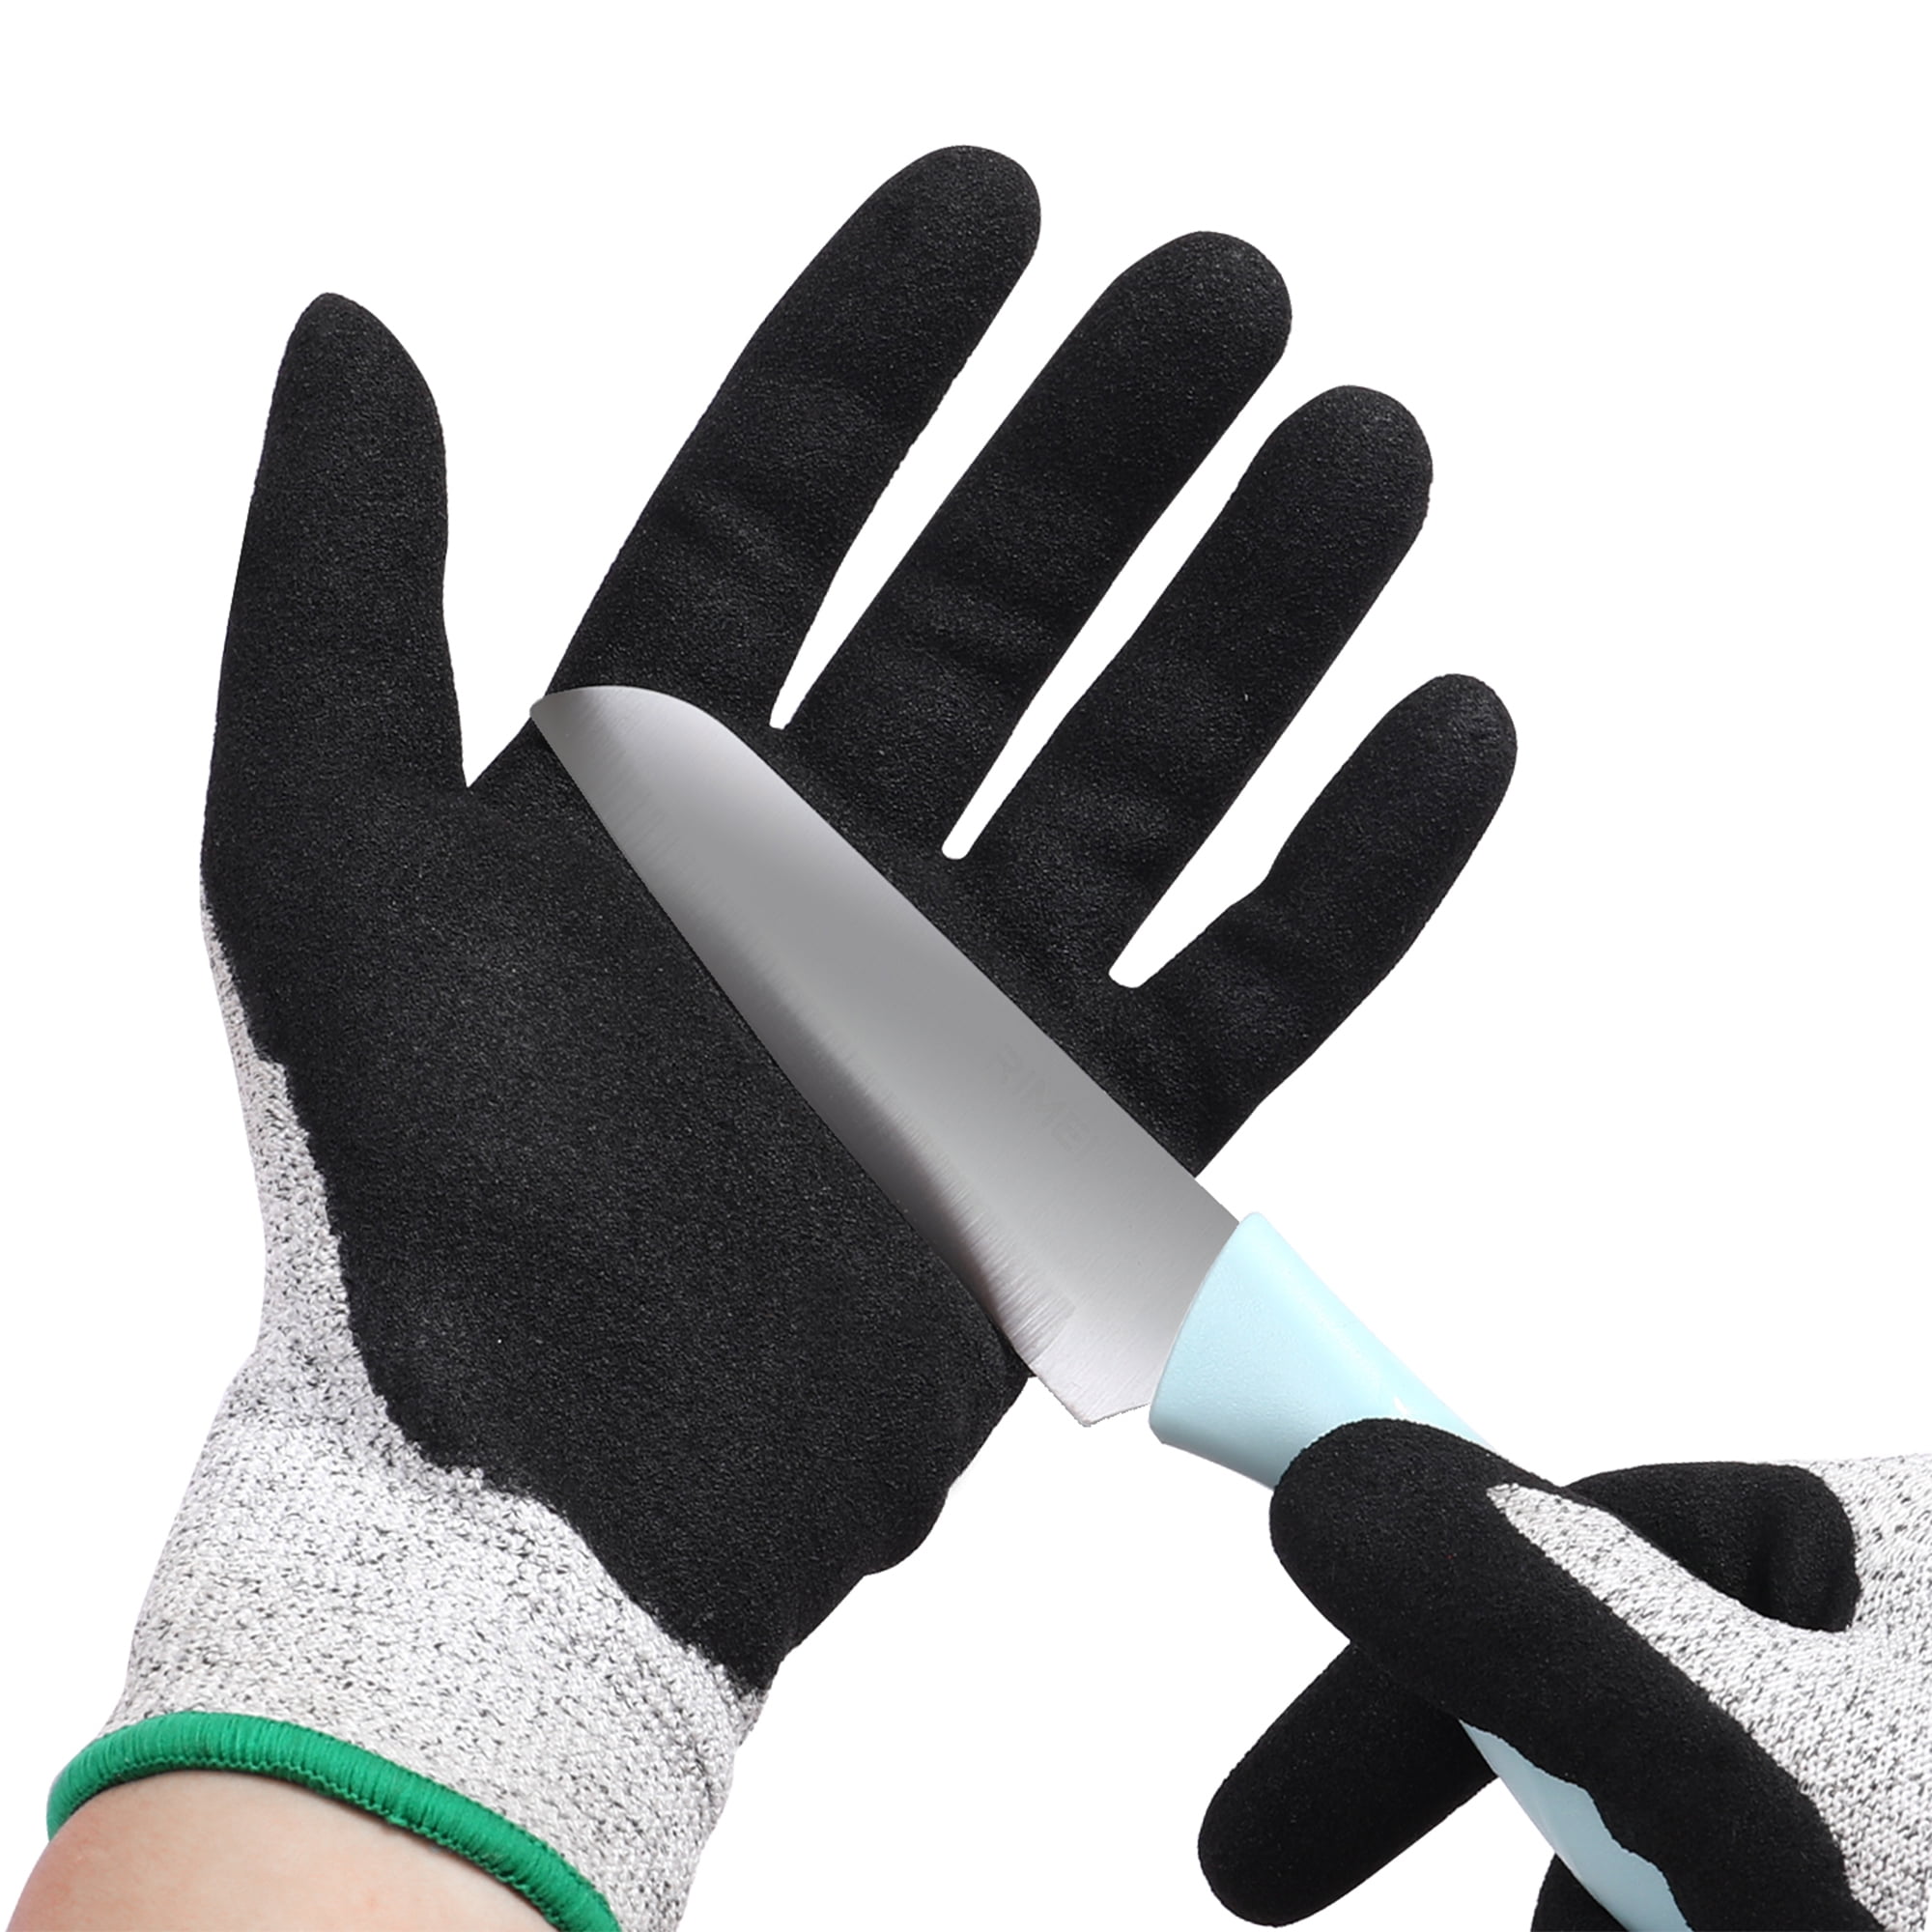 Generic Zulay Cut Resistant Gloves Food Grade Level 5 Protection -  Comfortable Safety Cutting Gloves - Cut Resistant